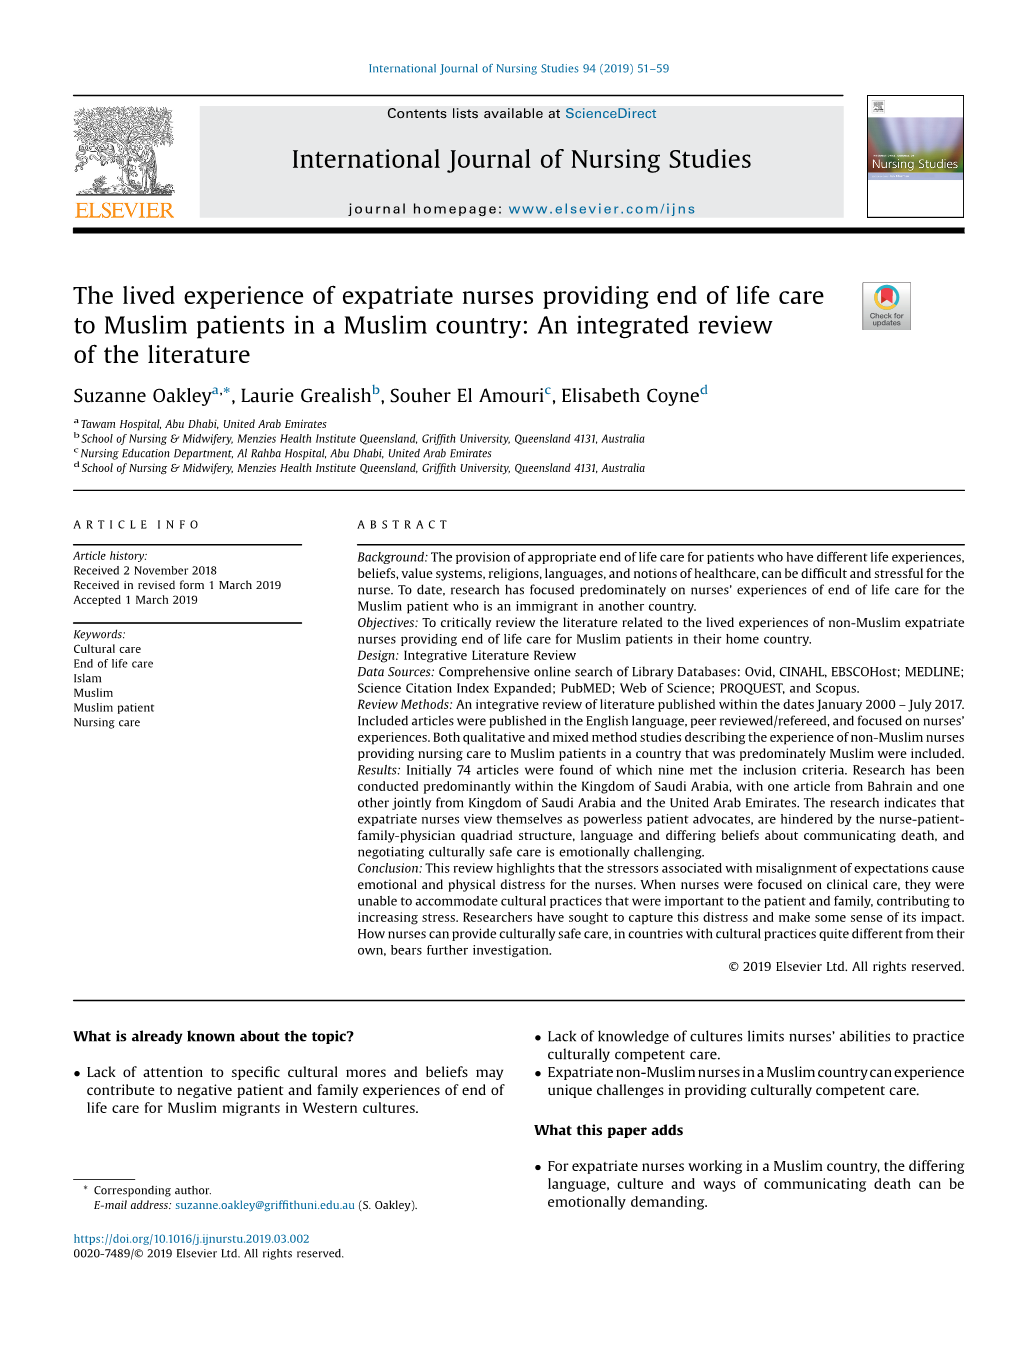 The Lived Experience of Expatriate Nurses Providing End of Life Care to Muslim Patients in a Muslim Country: an Integrated Revie